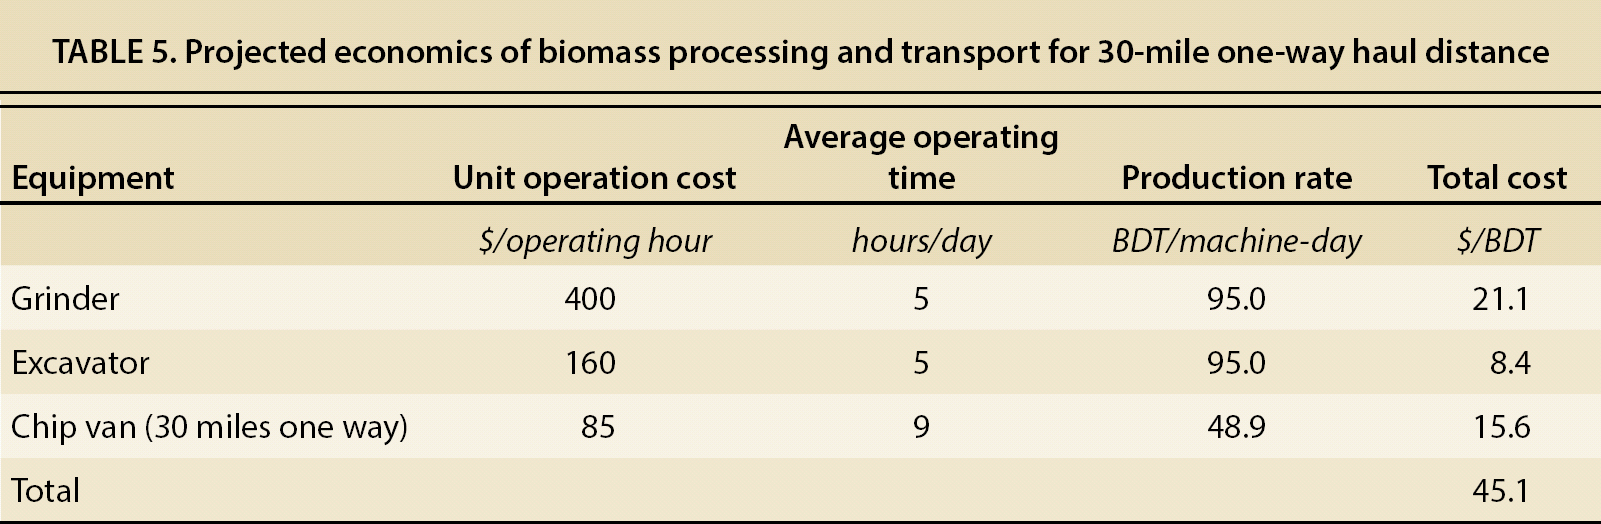 Projected economics of biomass processing and transport for 30-mile one-way haul distance